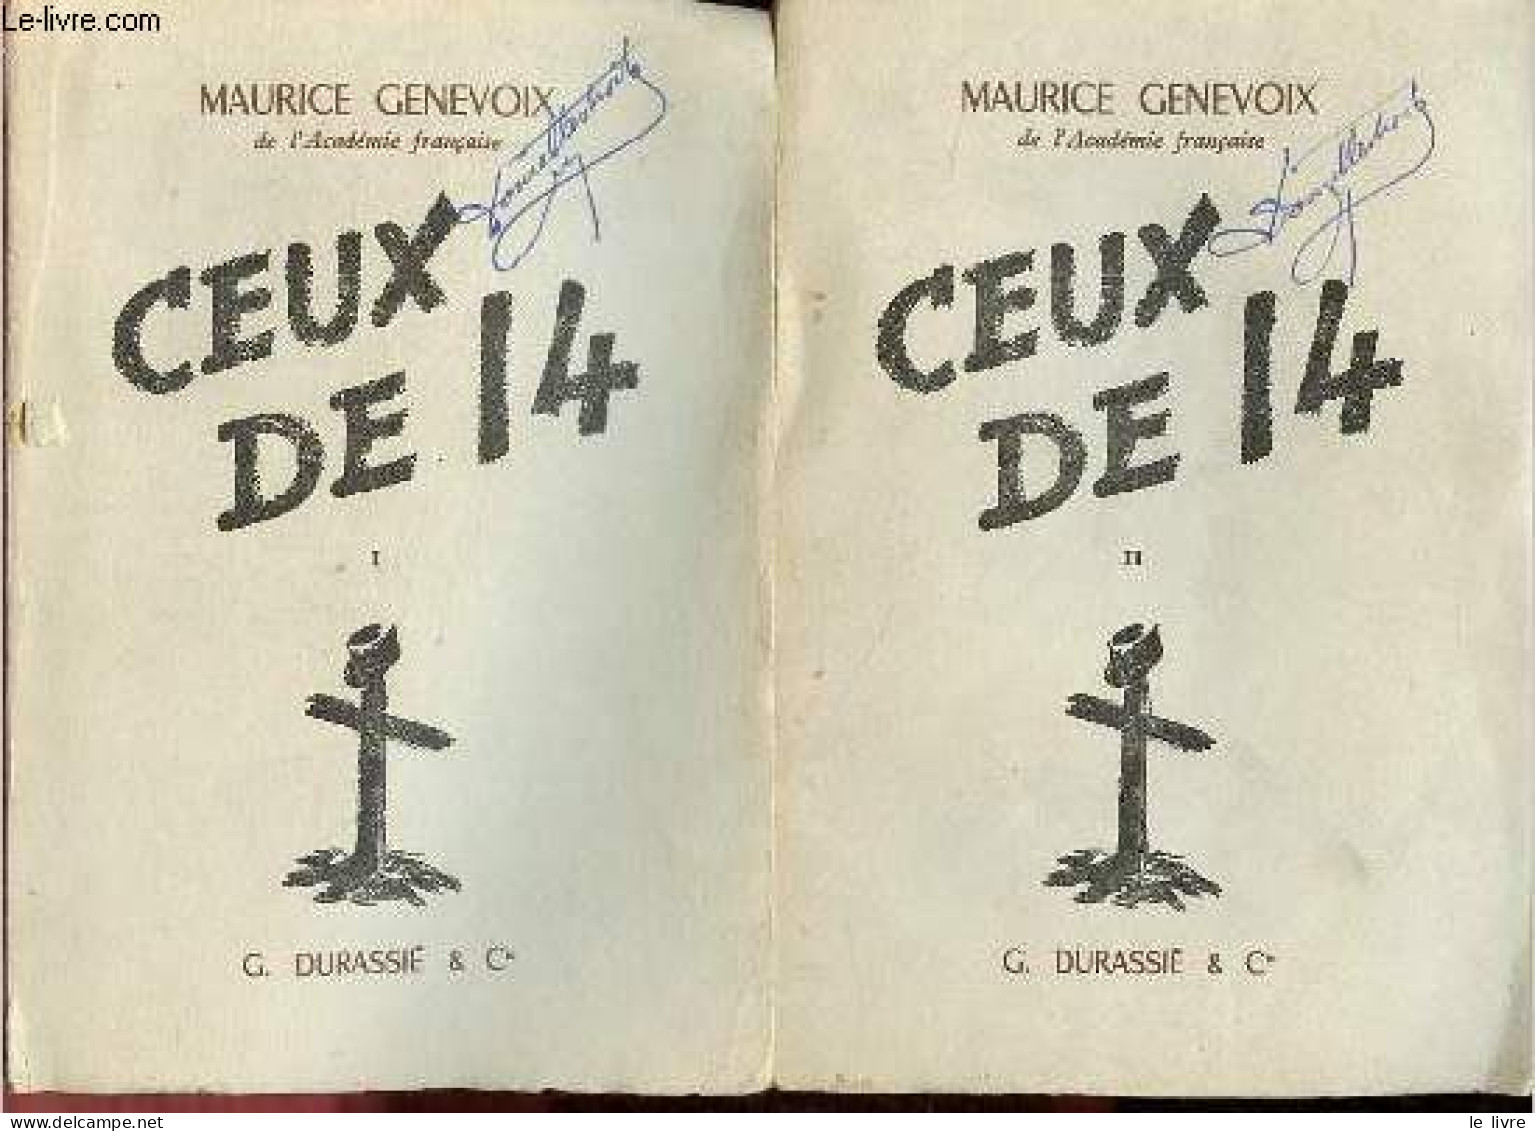 Ceux De 14 - Tome 1 + Tome 2 (2 Volumes). - Genevoix Maurice - 1953 - Guerre 1914-18